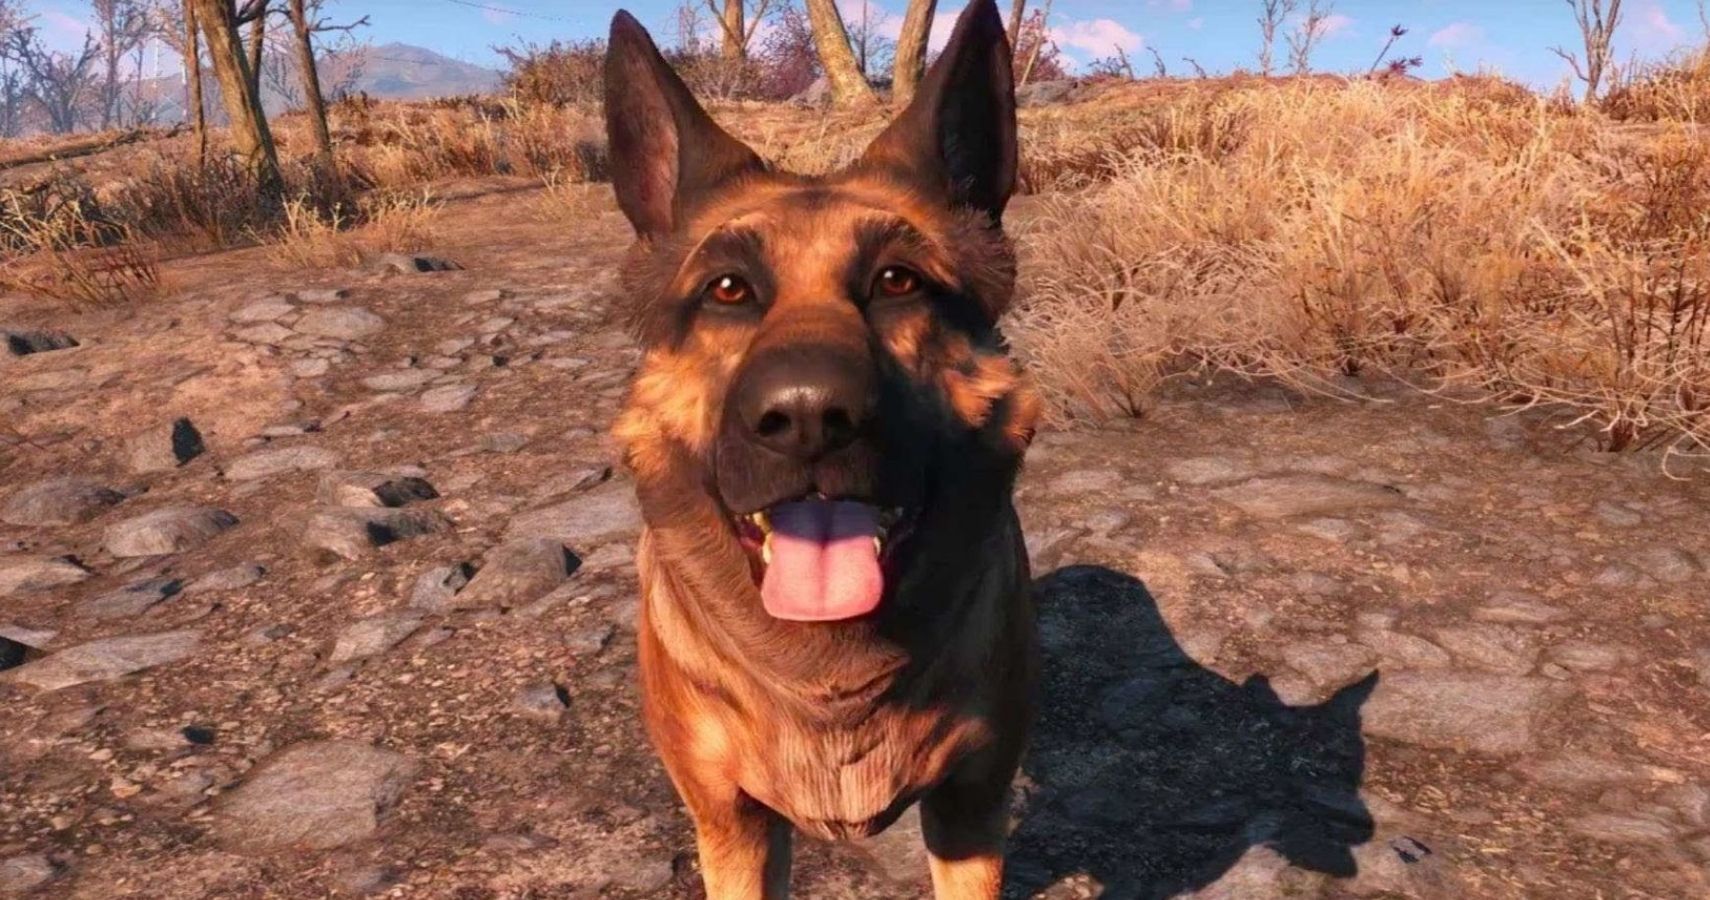 Fallout 4's Dogmeat Model Passes Away